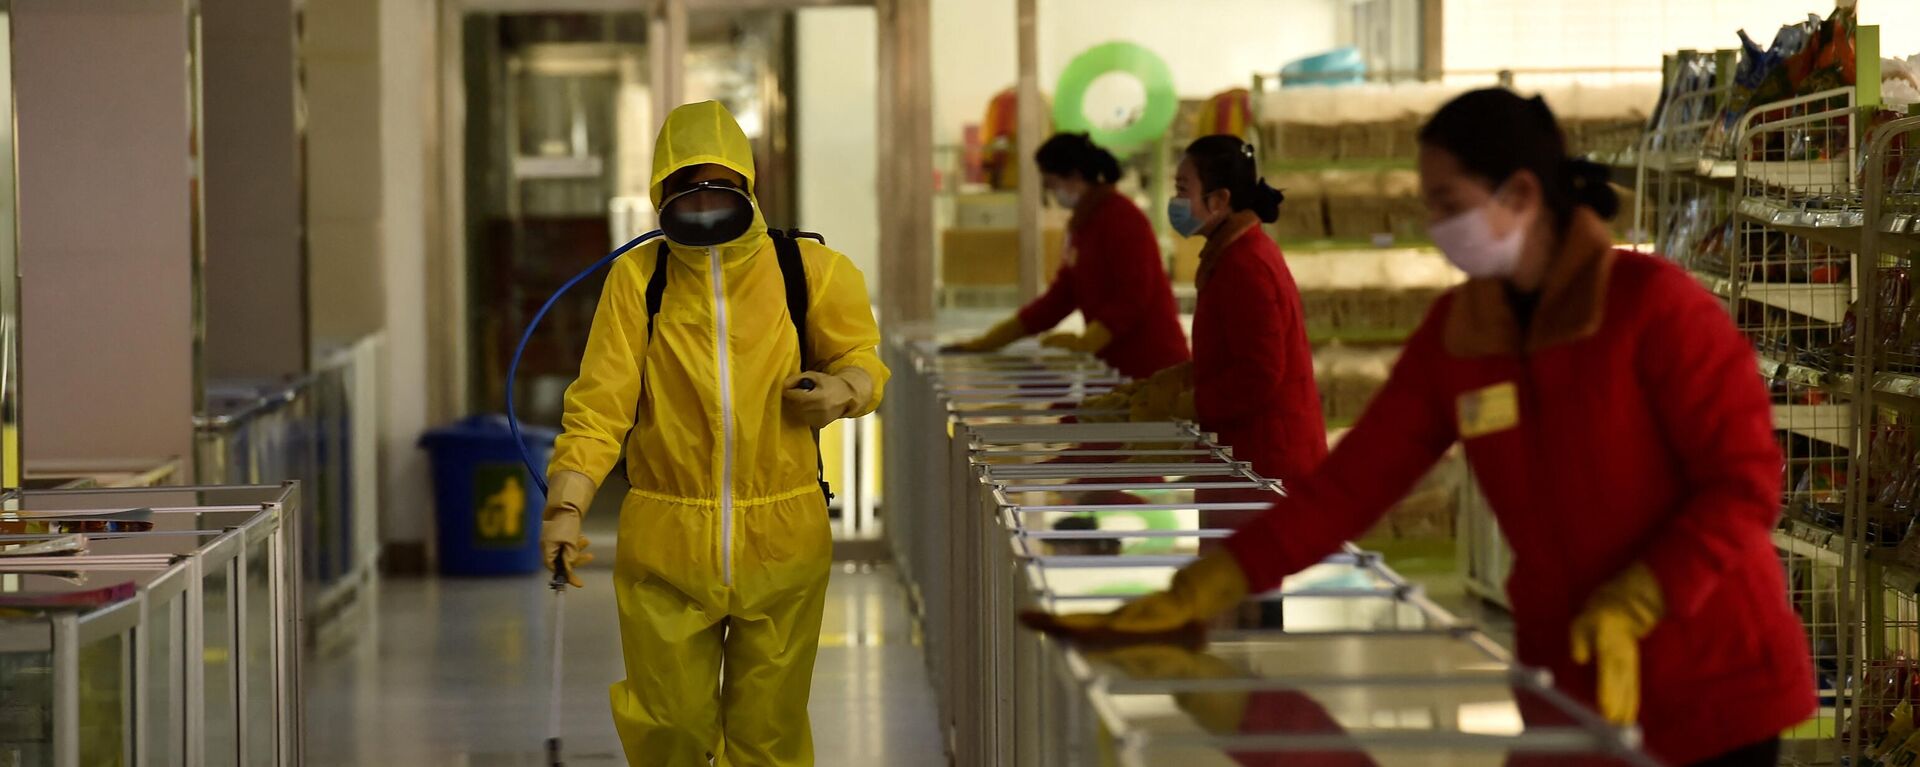 In this file photo taken on 18 March, 2022 employees spray disinfectant and wipe surfaces as part of preventative measures against the Covid-19 coronavirus at the Pyongyang Children's Department Store in Pyongyan - Sputnik International, 1920, 15.05.2022